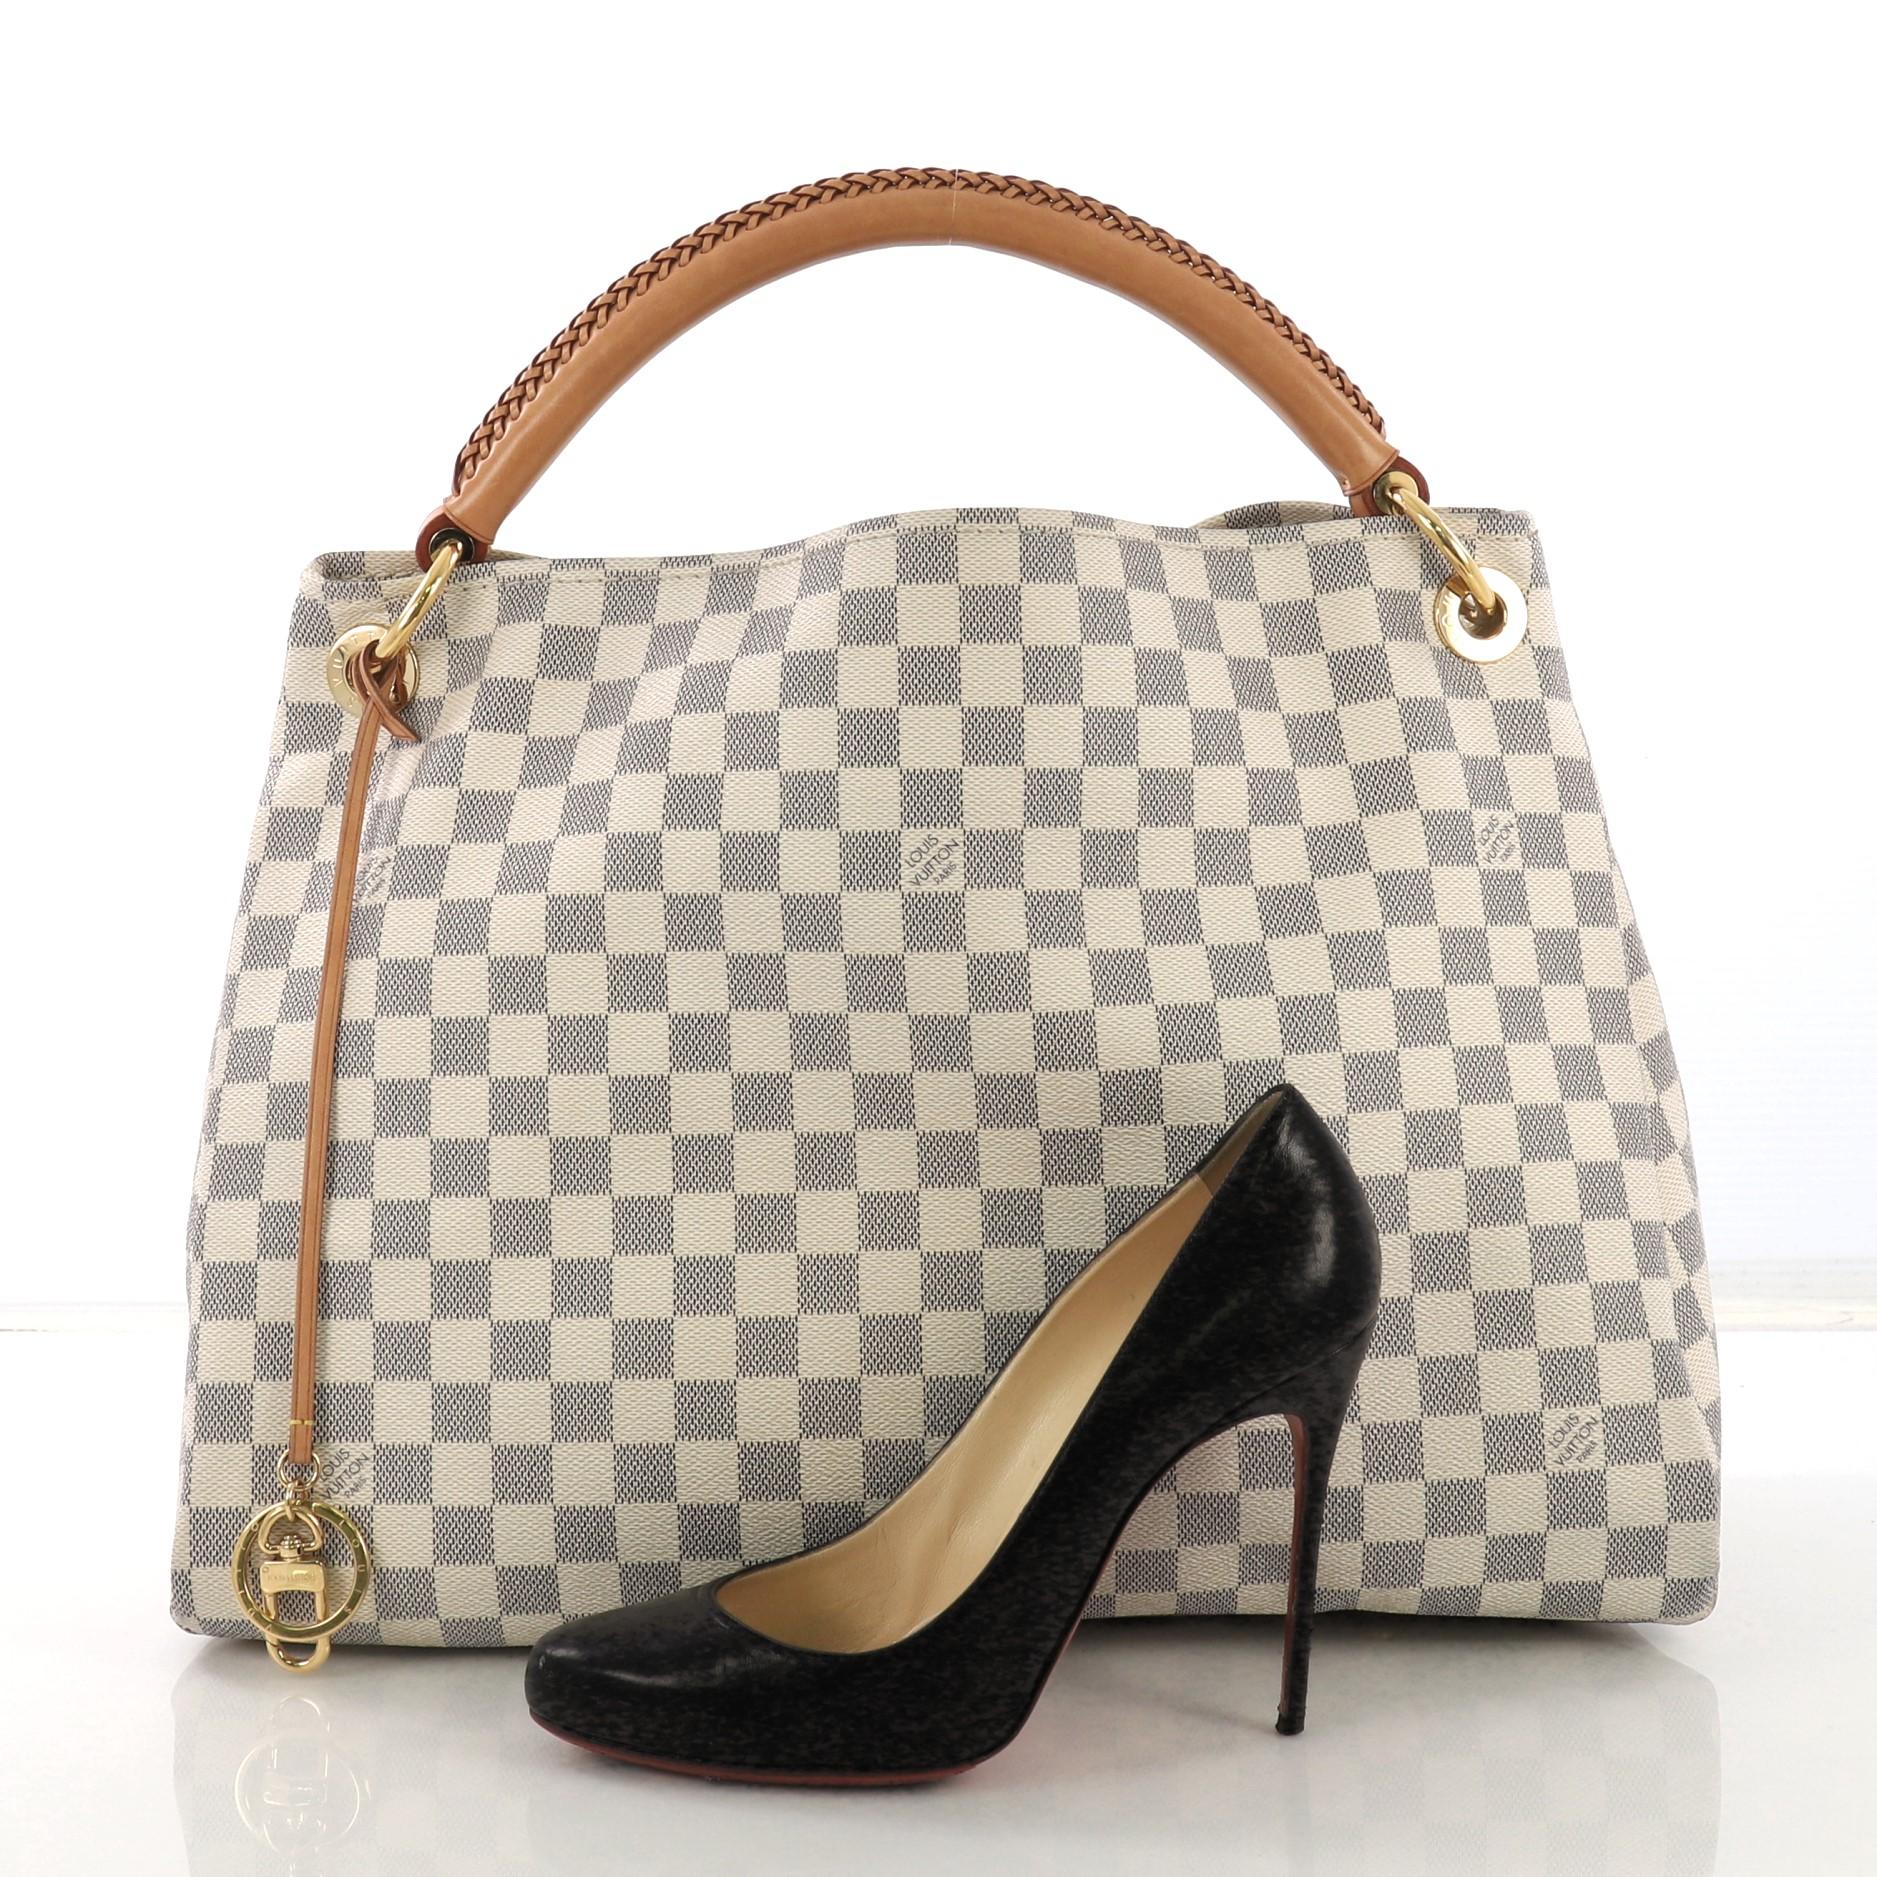 This Louis Vuitton Artsy Handbag Damier MM, crafted from damier azur coated canvas, features a single looped hand-crafted leather handle, protective base studs, and gold-tone hardware. Its wide open top showcases a beige microfiber interior with zip